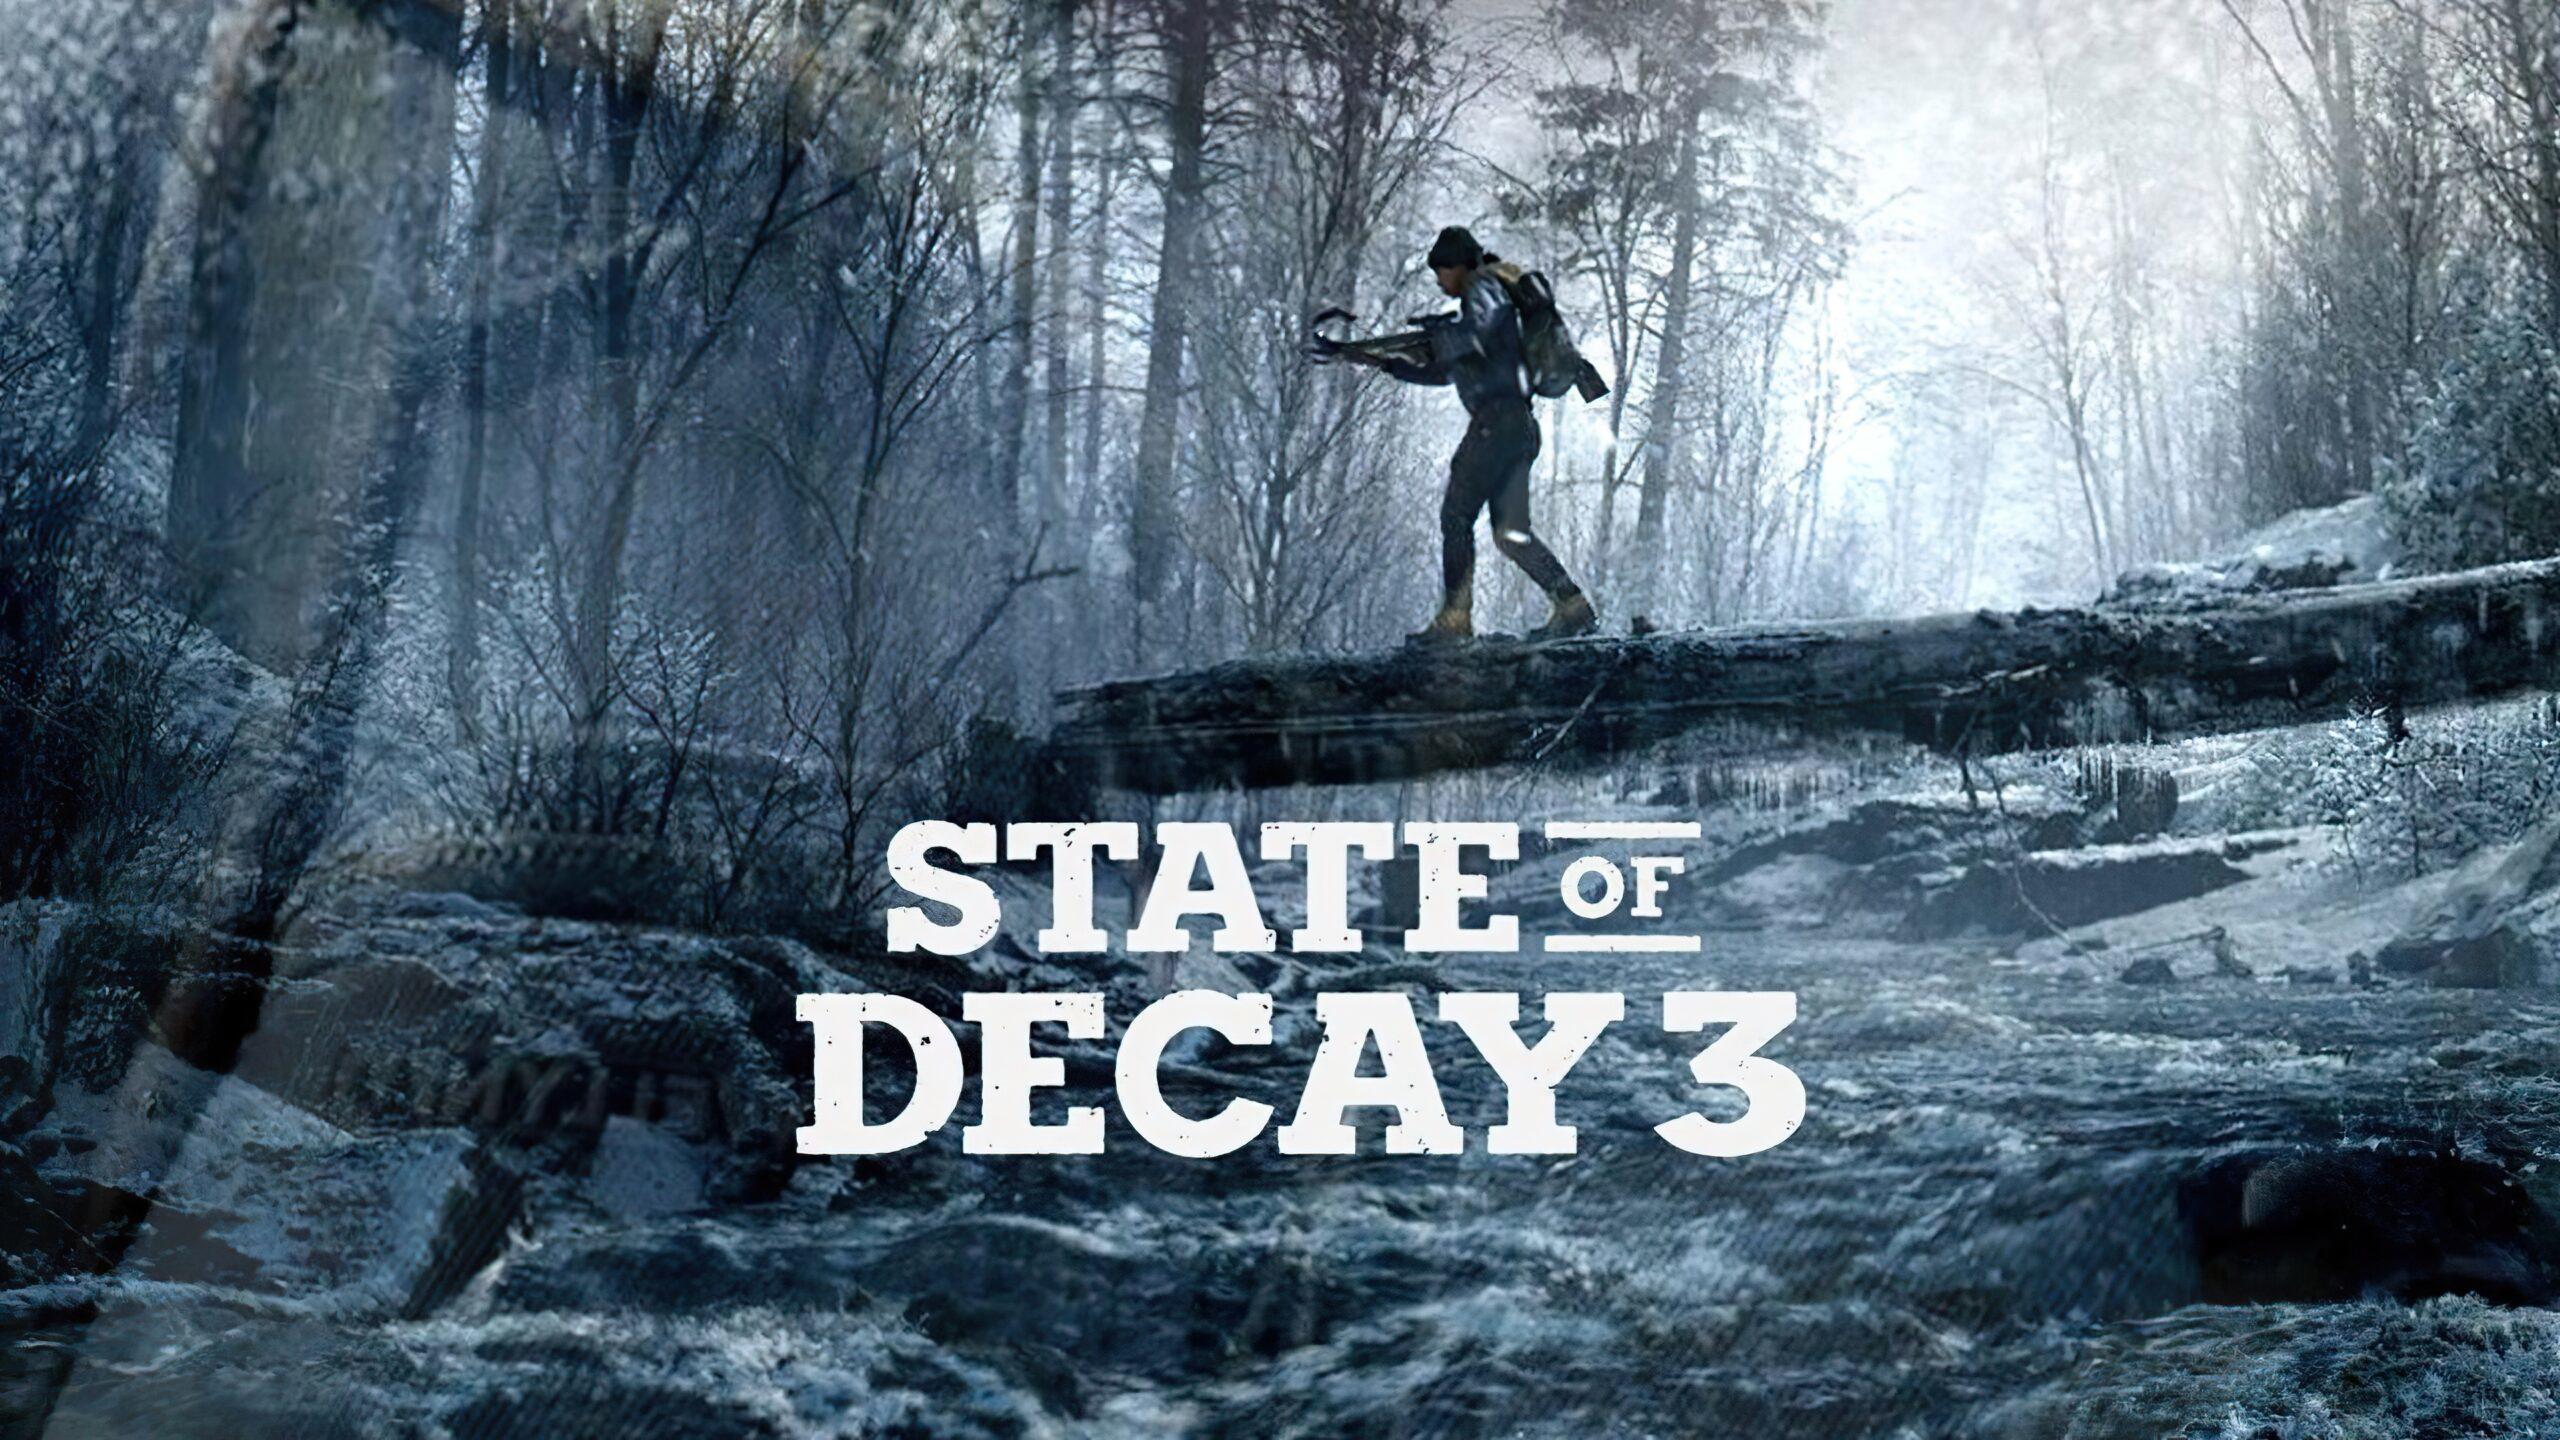 Rumor - State of Decay 3 is scheduled for 2027